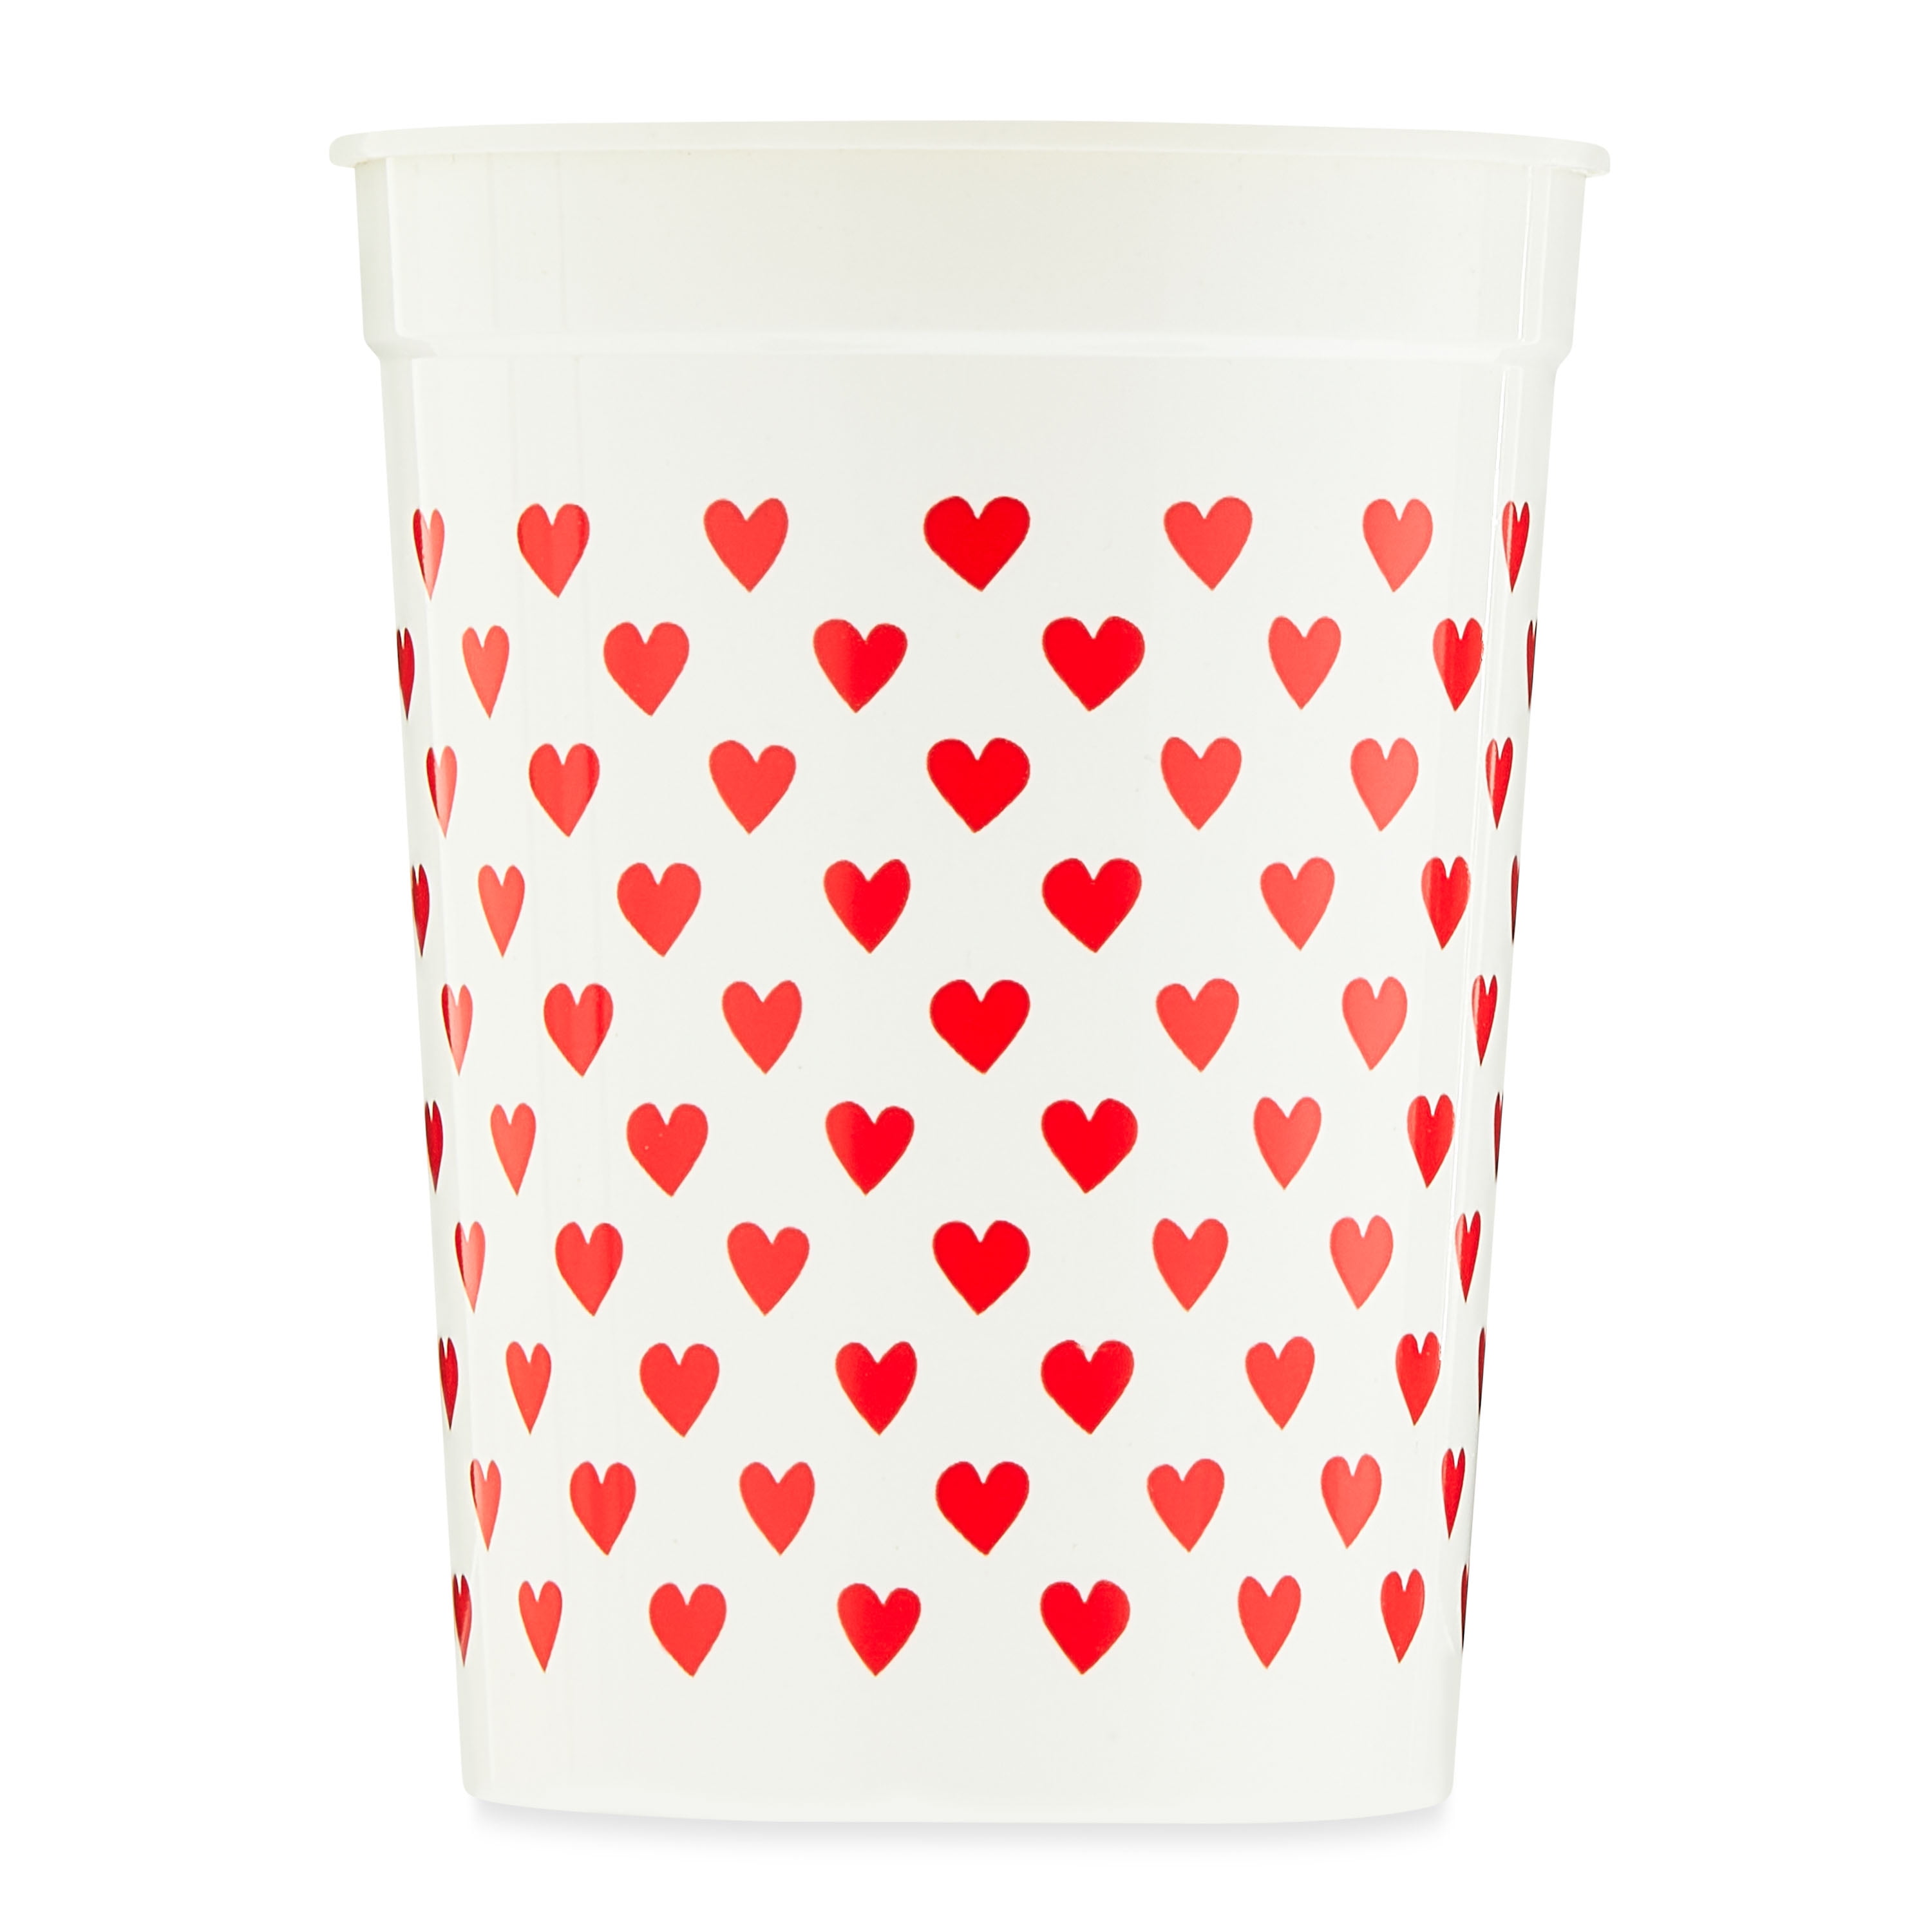 Valentine's Day White & Red Hearts Plastic Cups, 4 Count, by Way